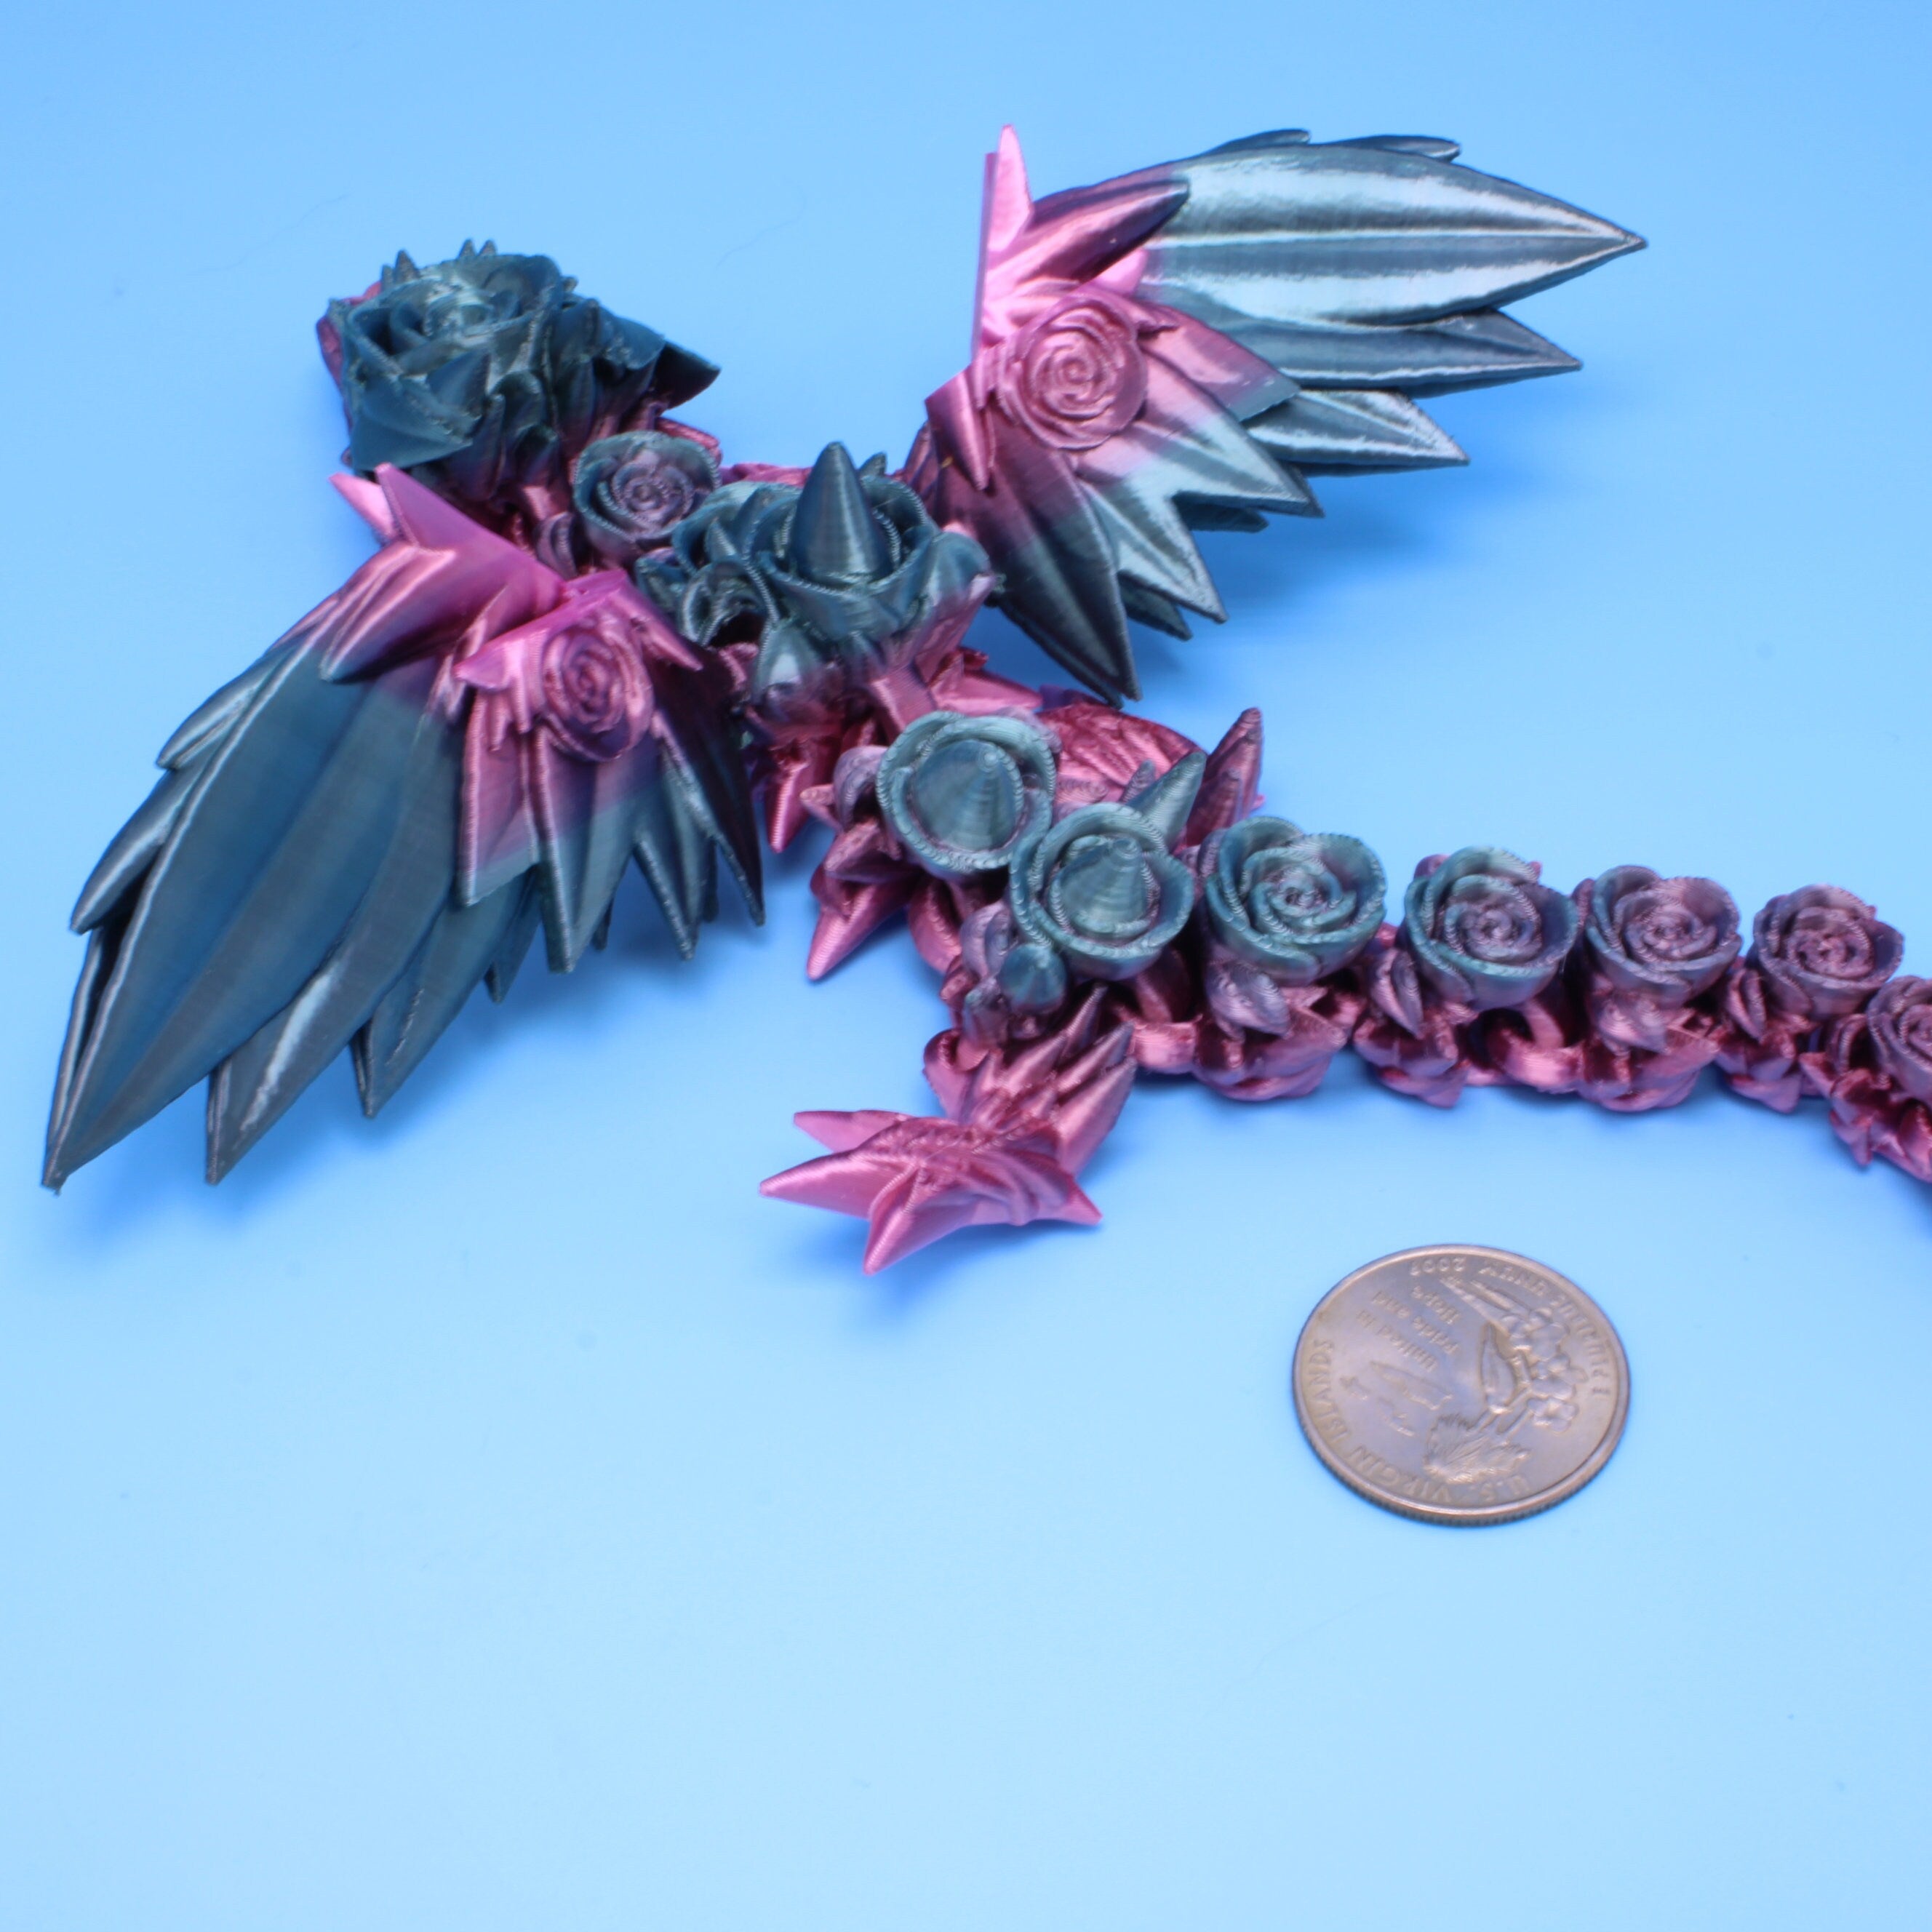 Baby Rose Wing Dragon | 8.5 in.